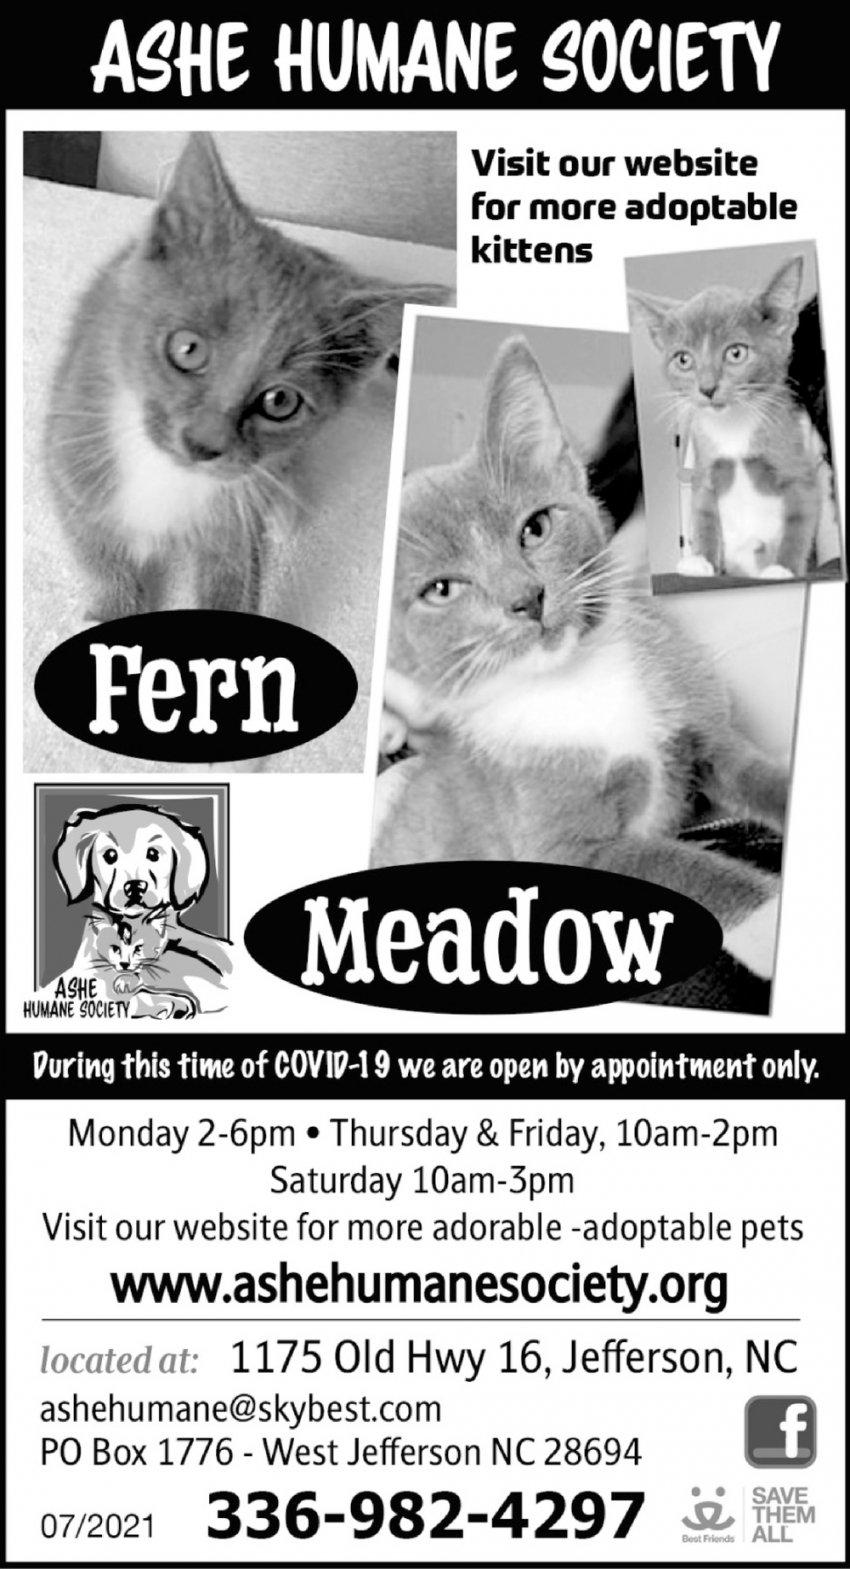 Visit Our Website For More Adoptable Kittens